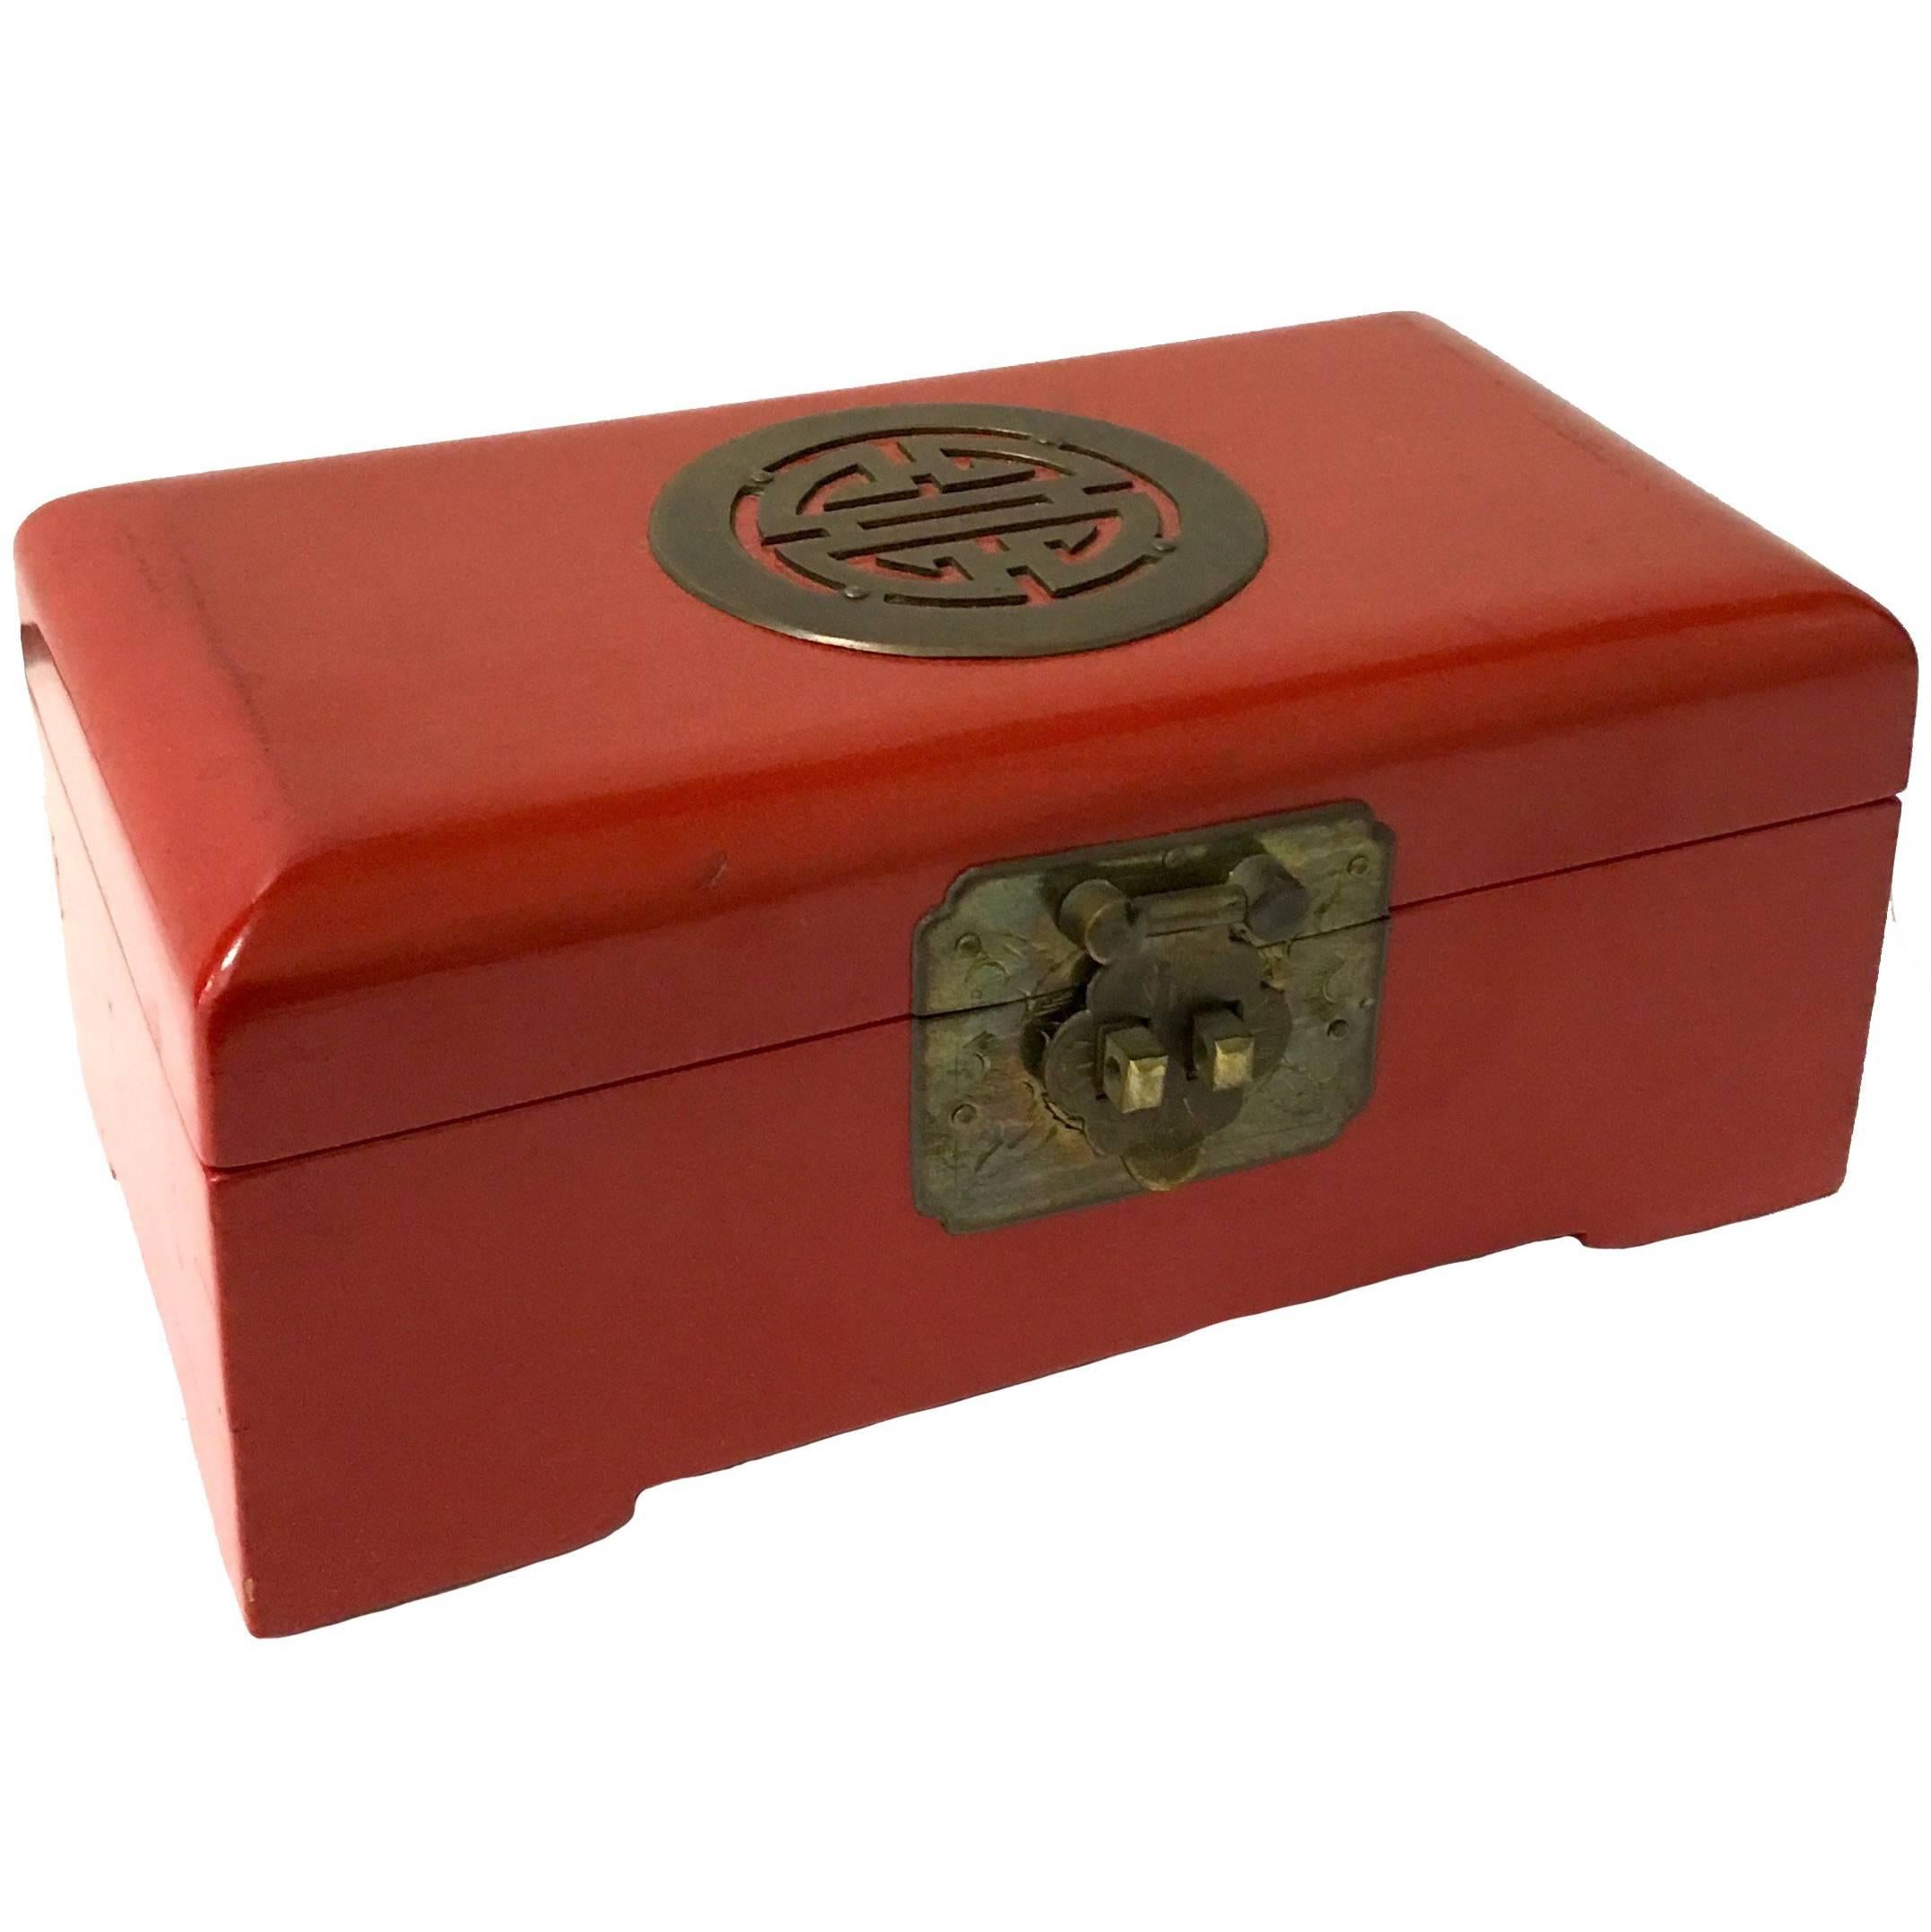 Chinese Red Lacquer with Brass Accents Box